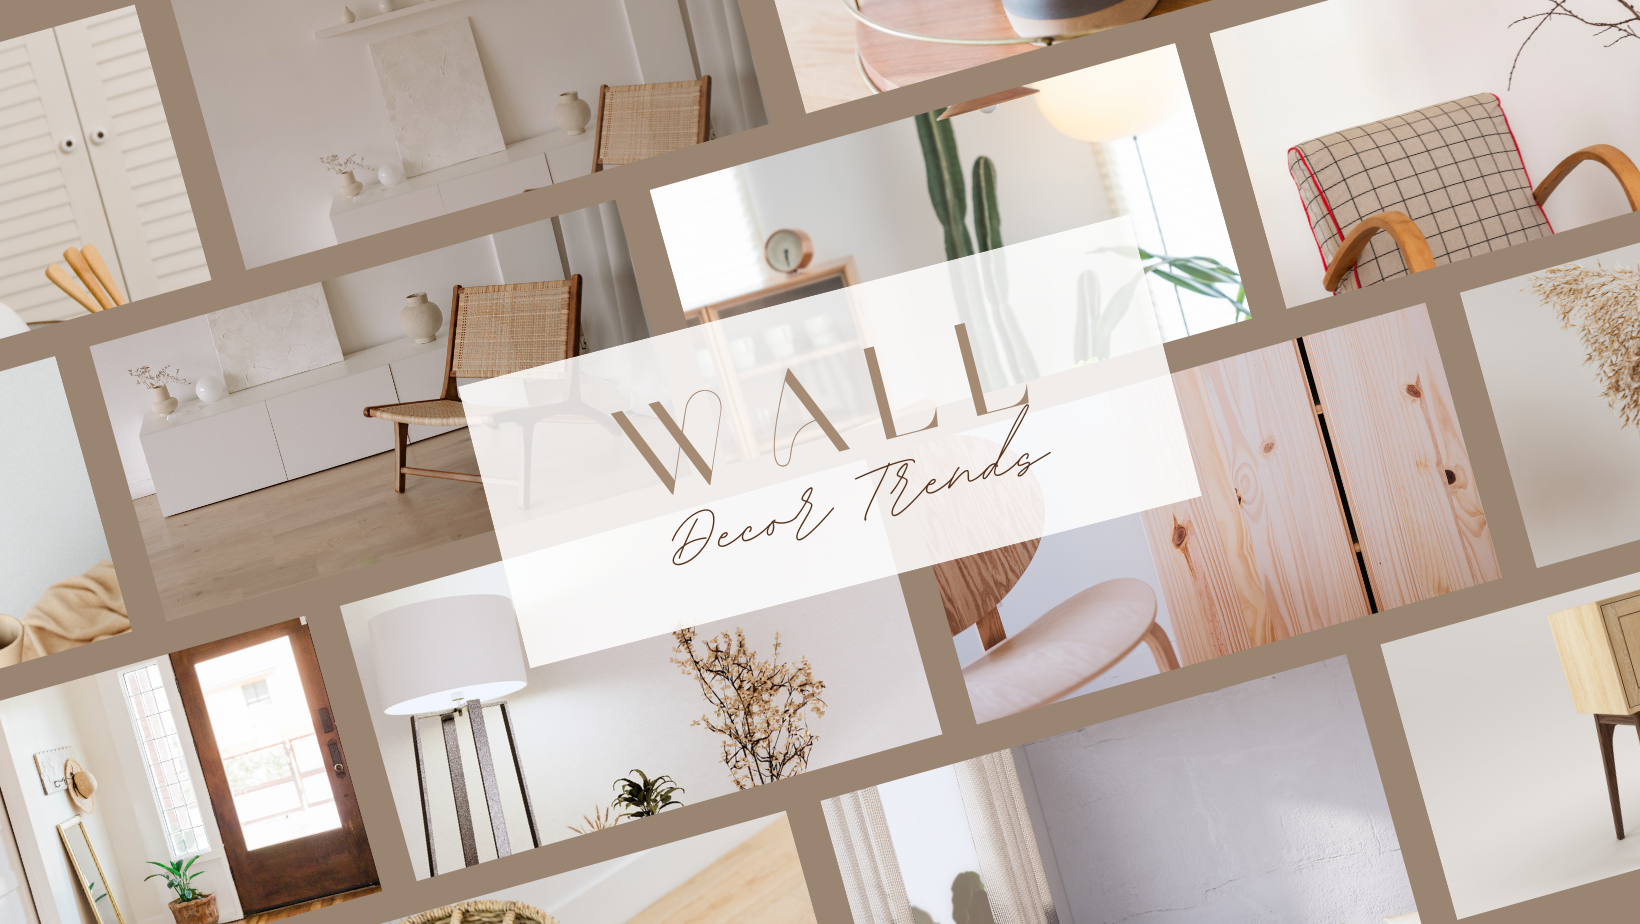 wall decor trends